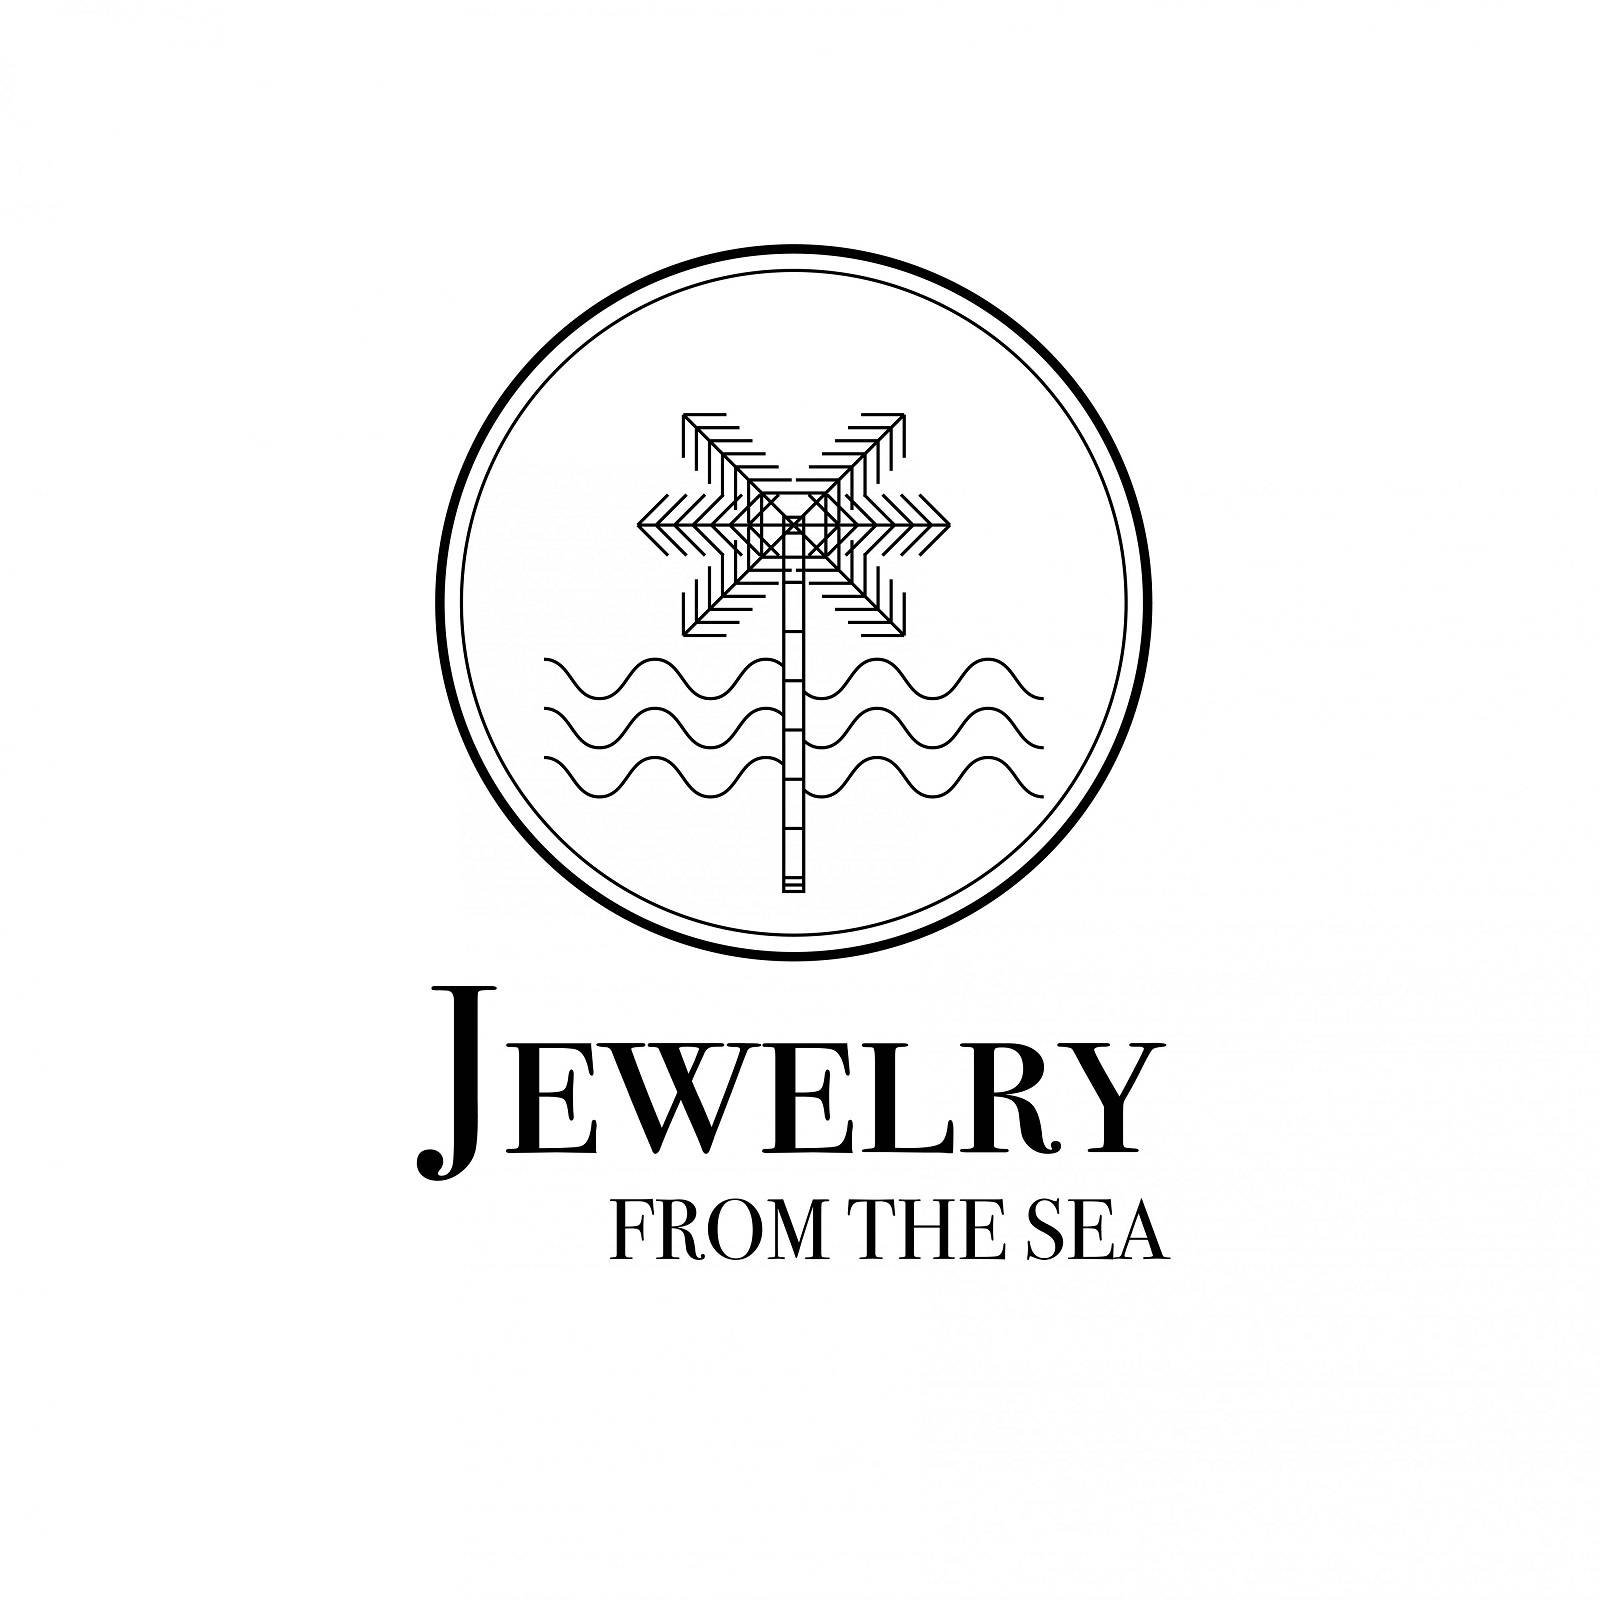 Jewelry from the sea logo